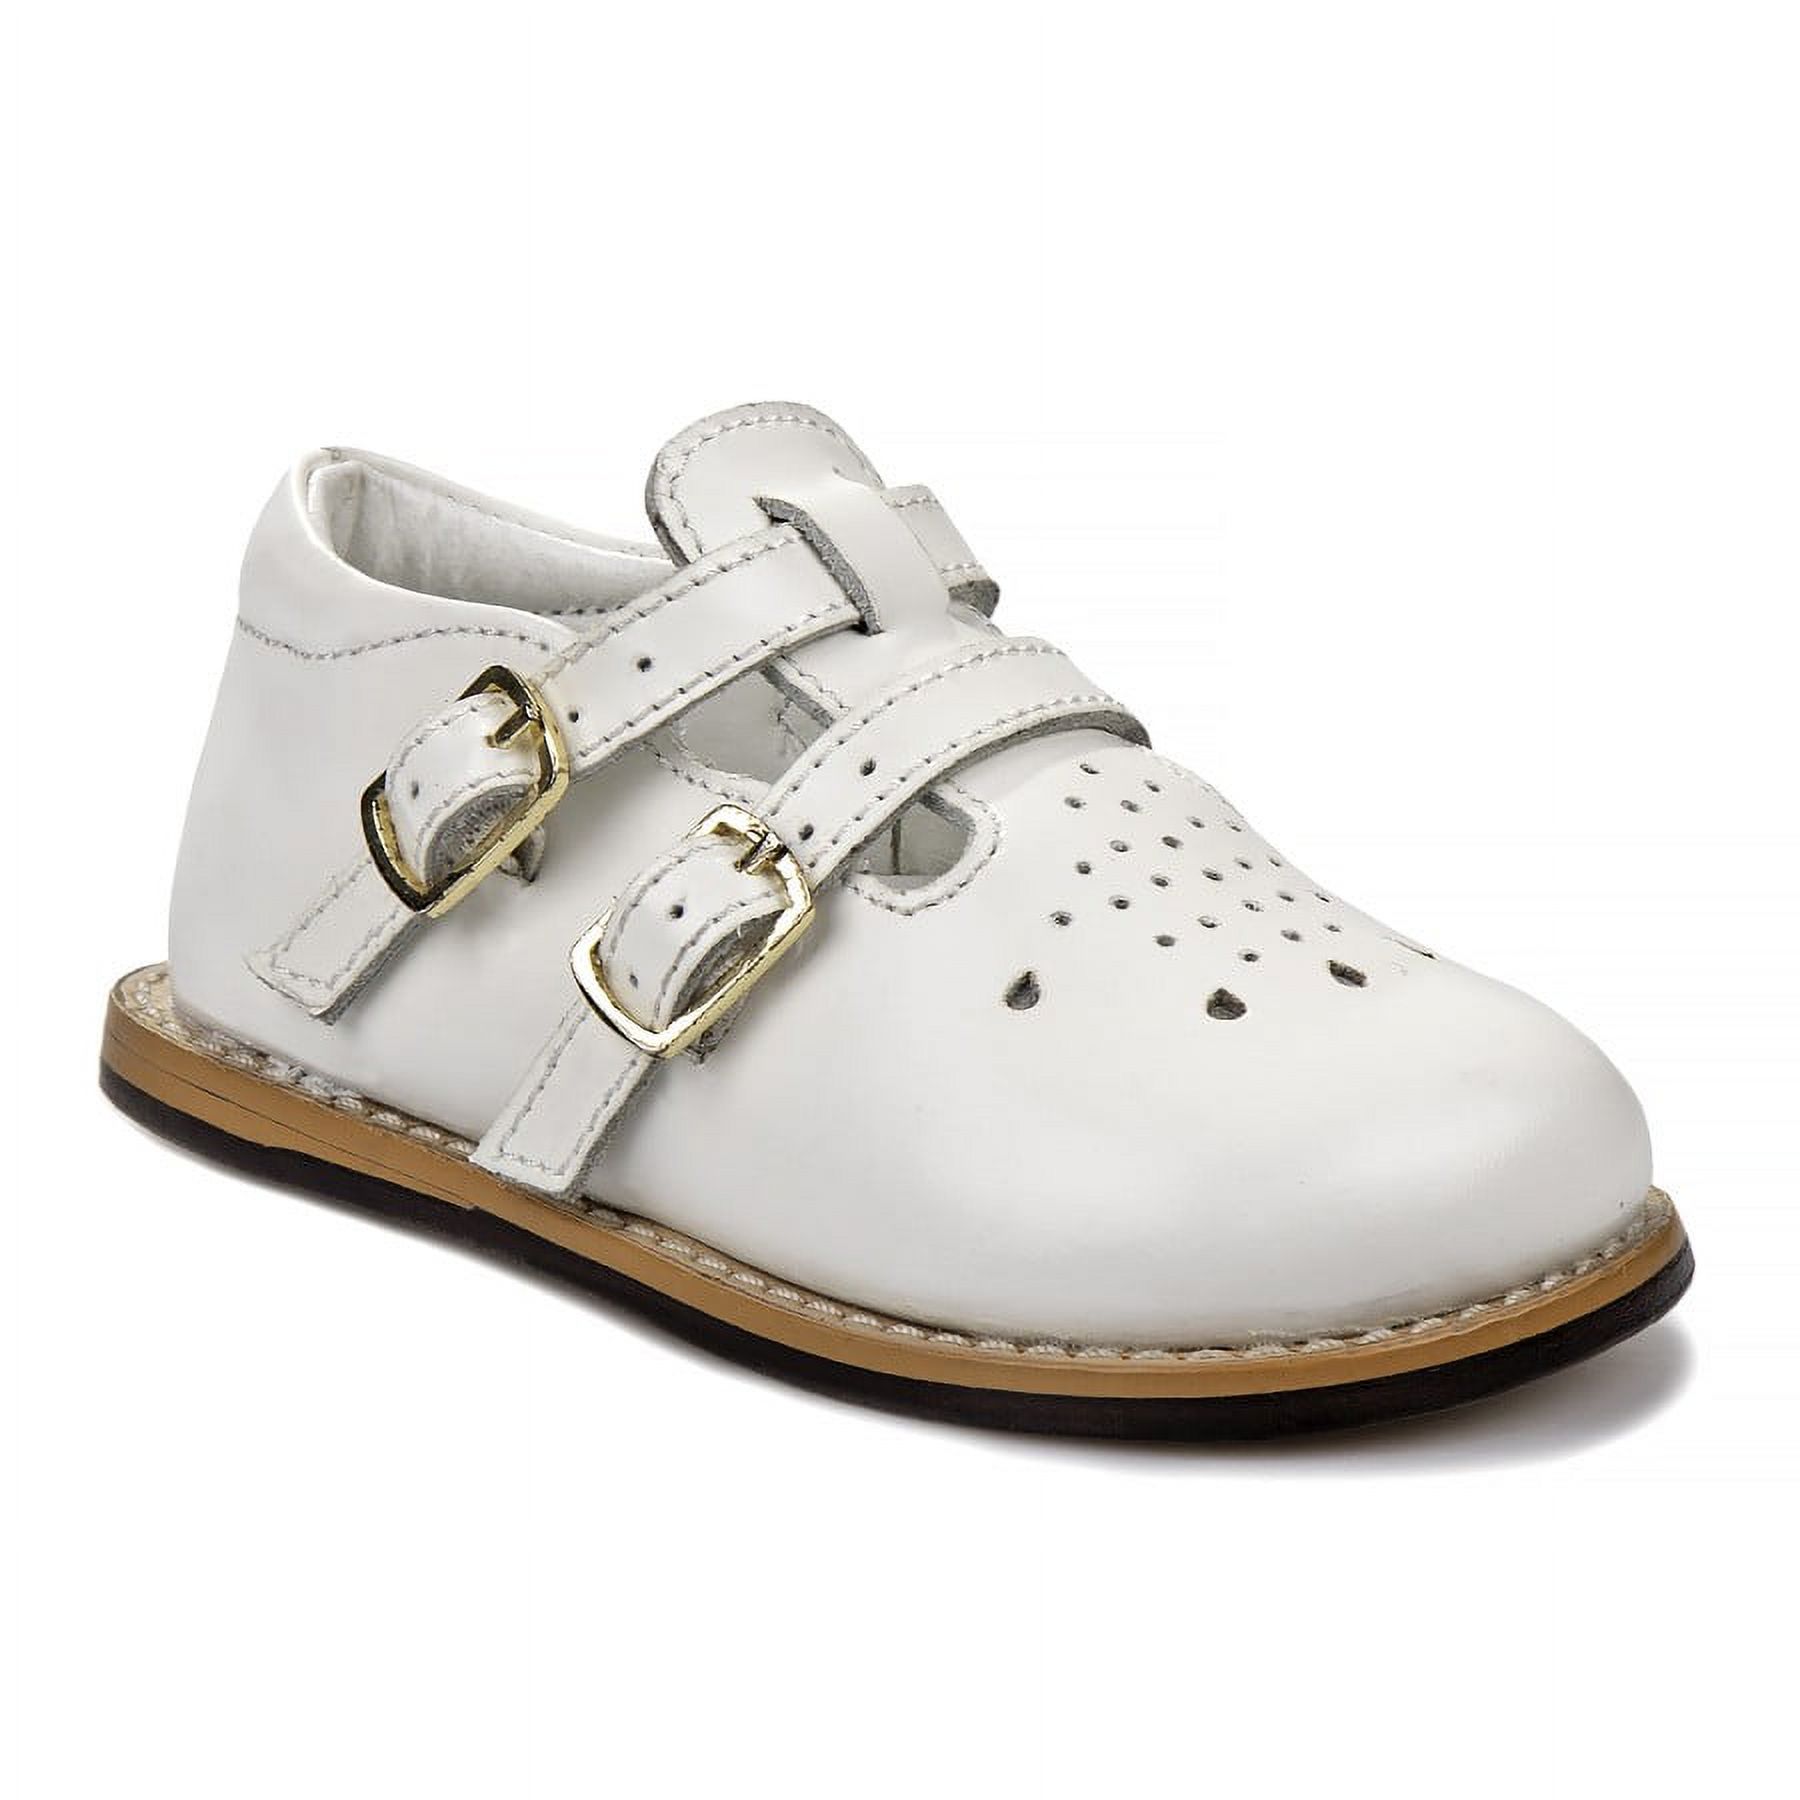 Josmo 8193 Buckle Toddlers' Wide Width Walking Shoes - White, 5.5 - image 1 of 5